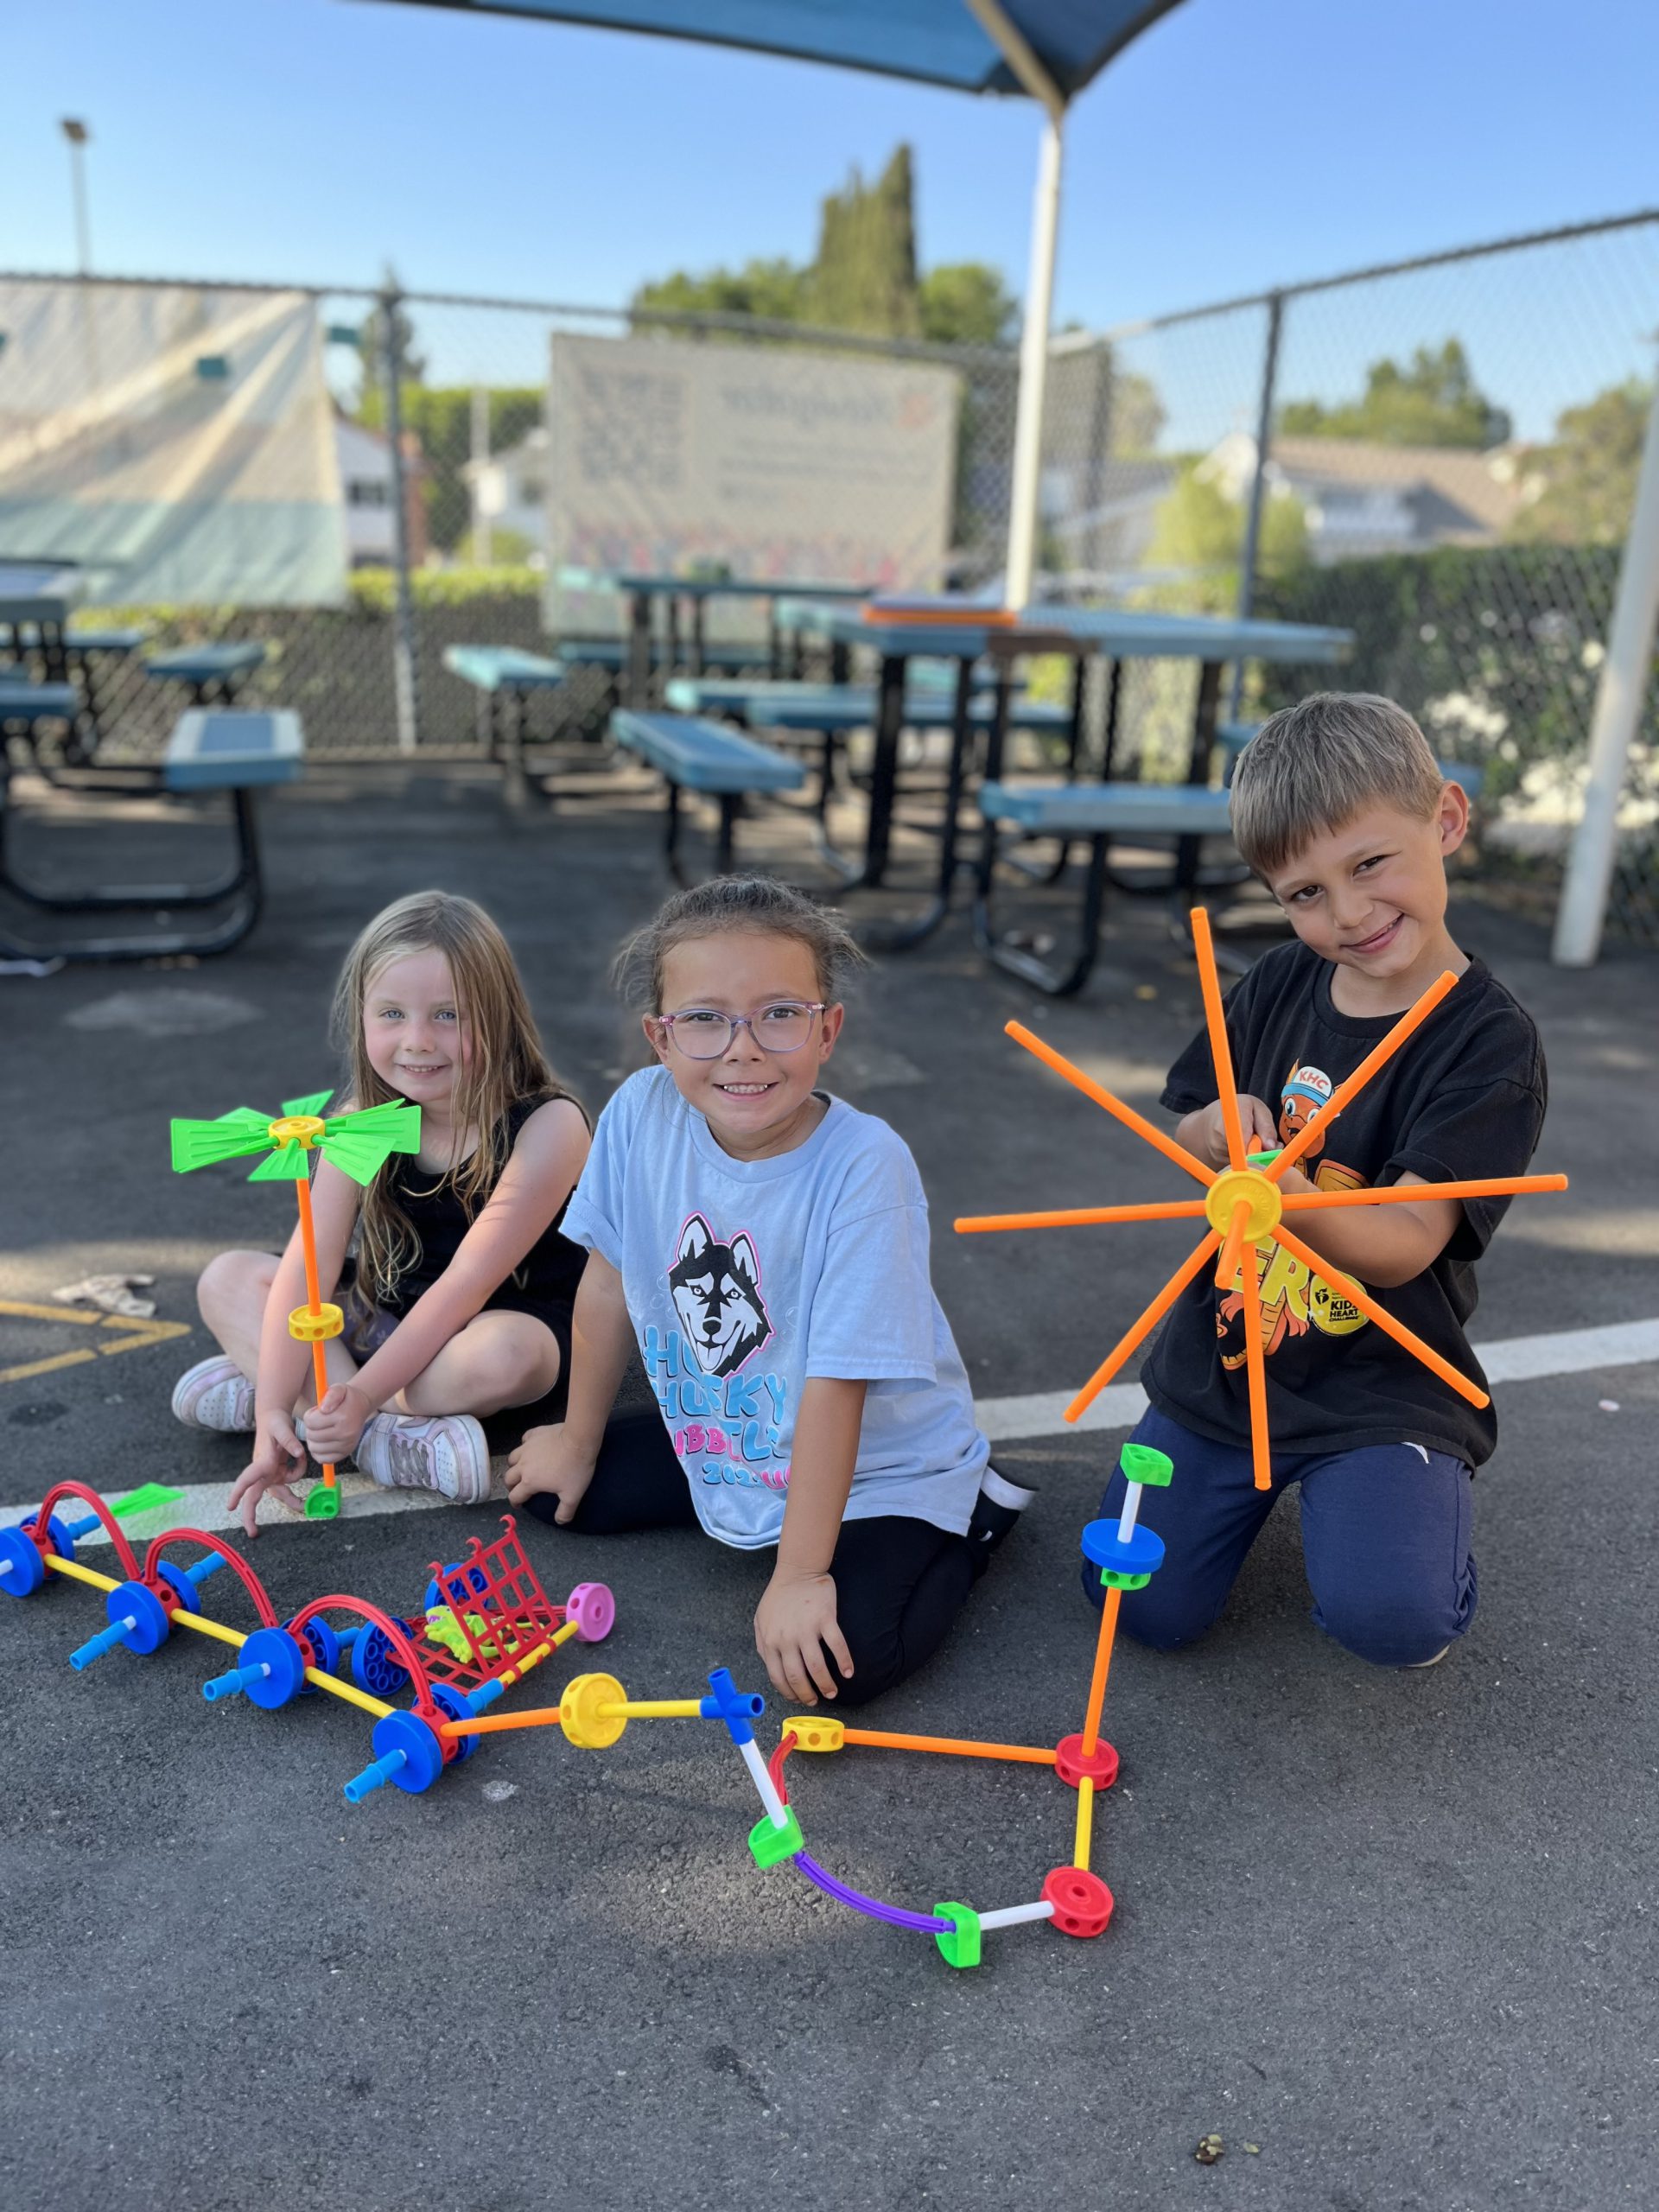 Three Oxford Saddleback Valley students create cool designs with tinker toys